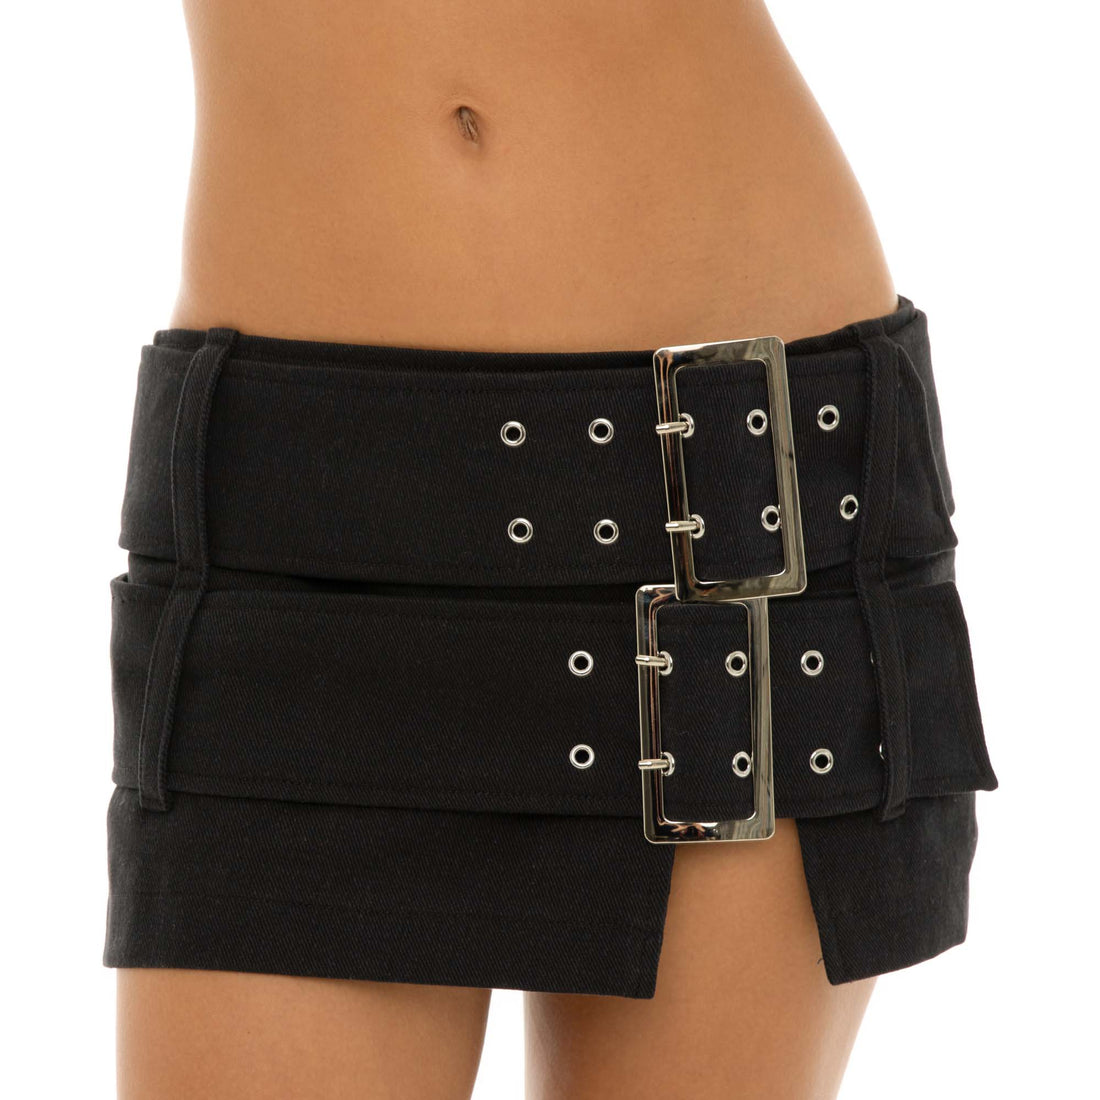 Are You Am I - Syle Skirt **black